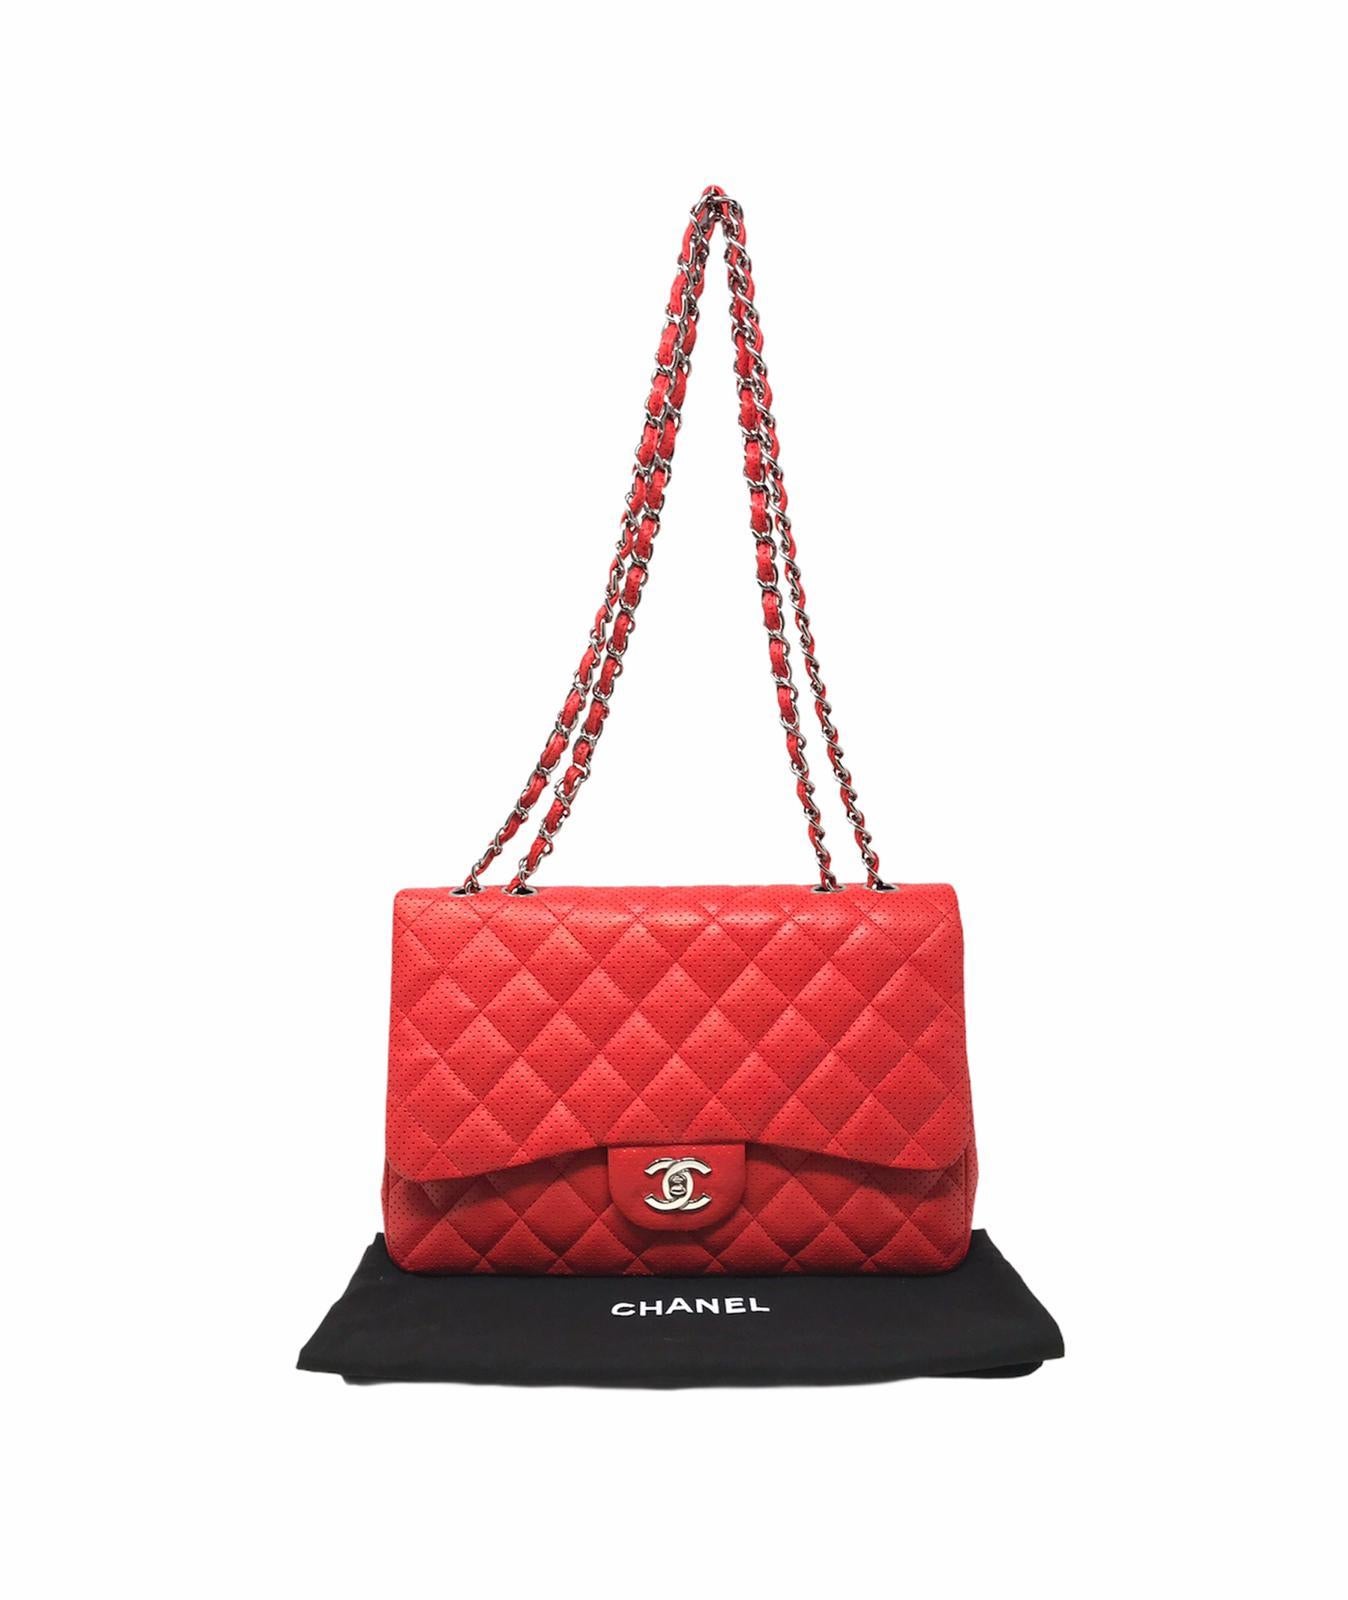 CHANEL Jumbo Red Timeless Limited Edition 2010 For Sale 5